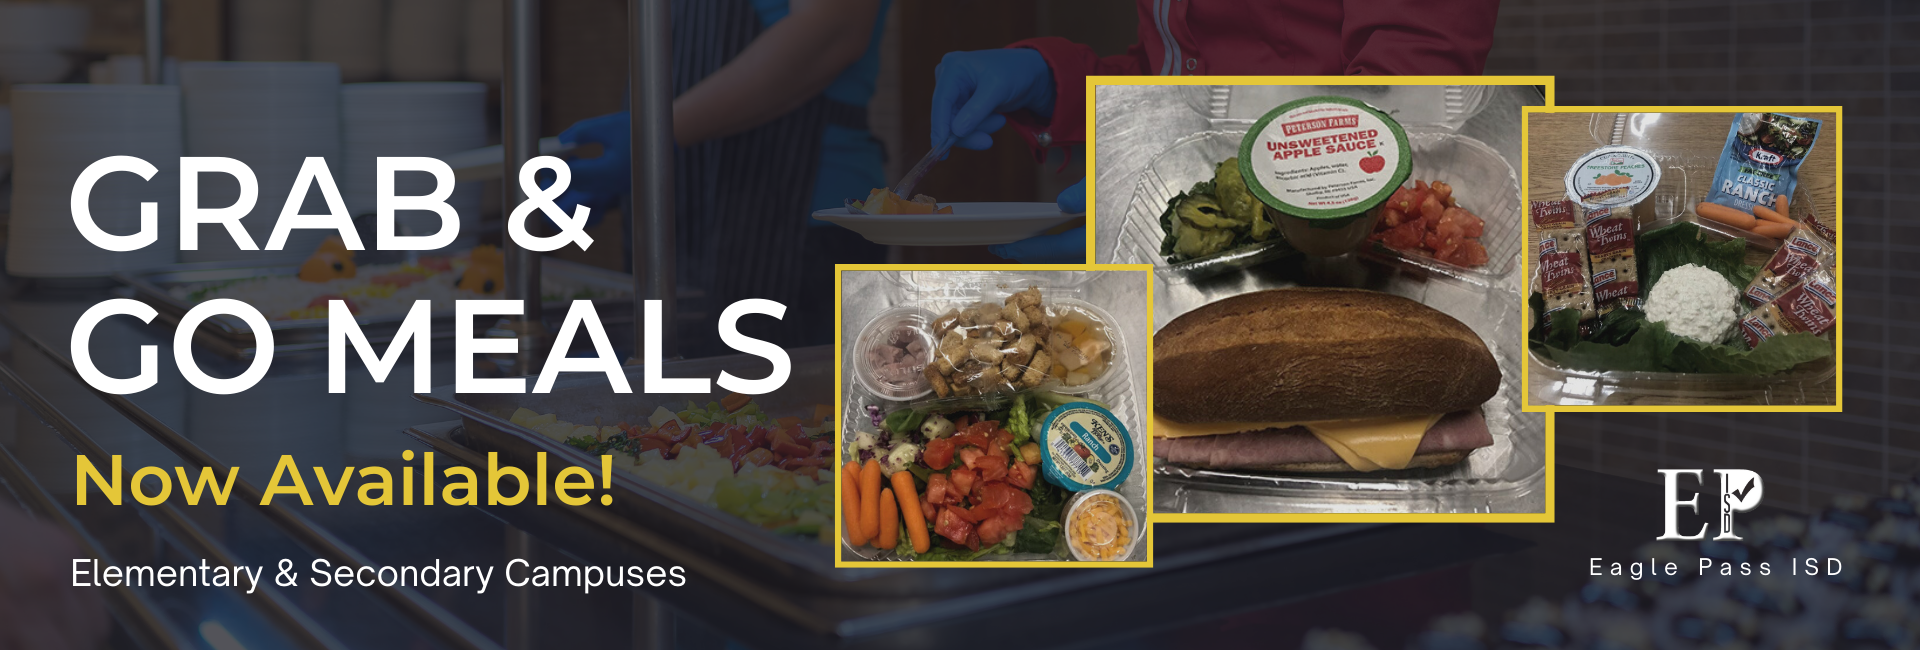 Grab and go meal banner